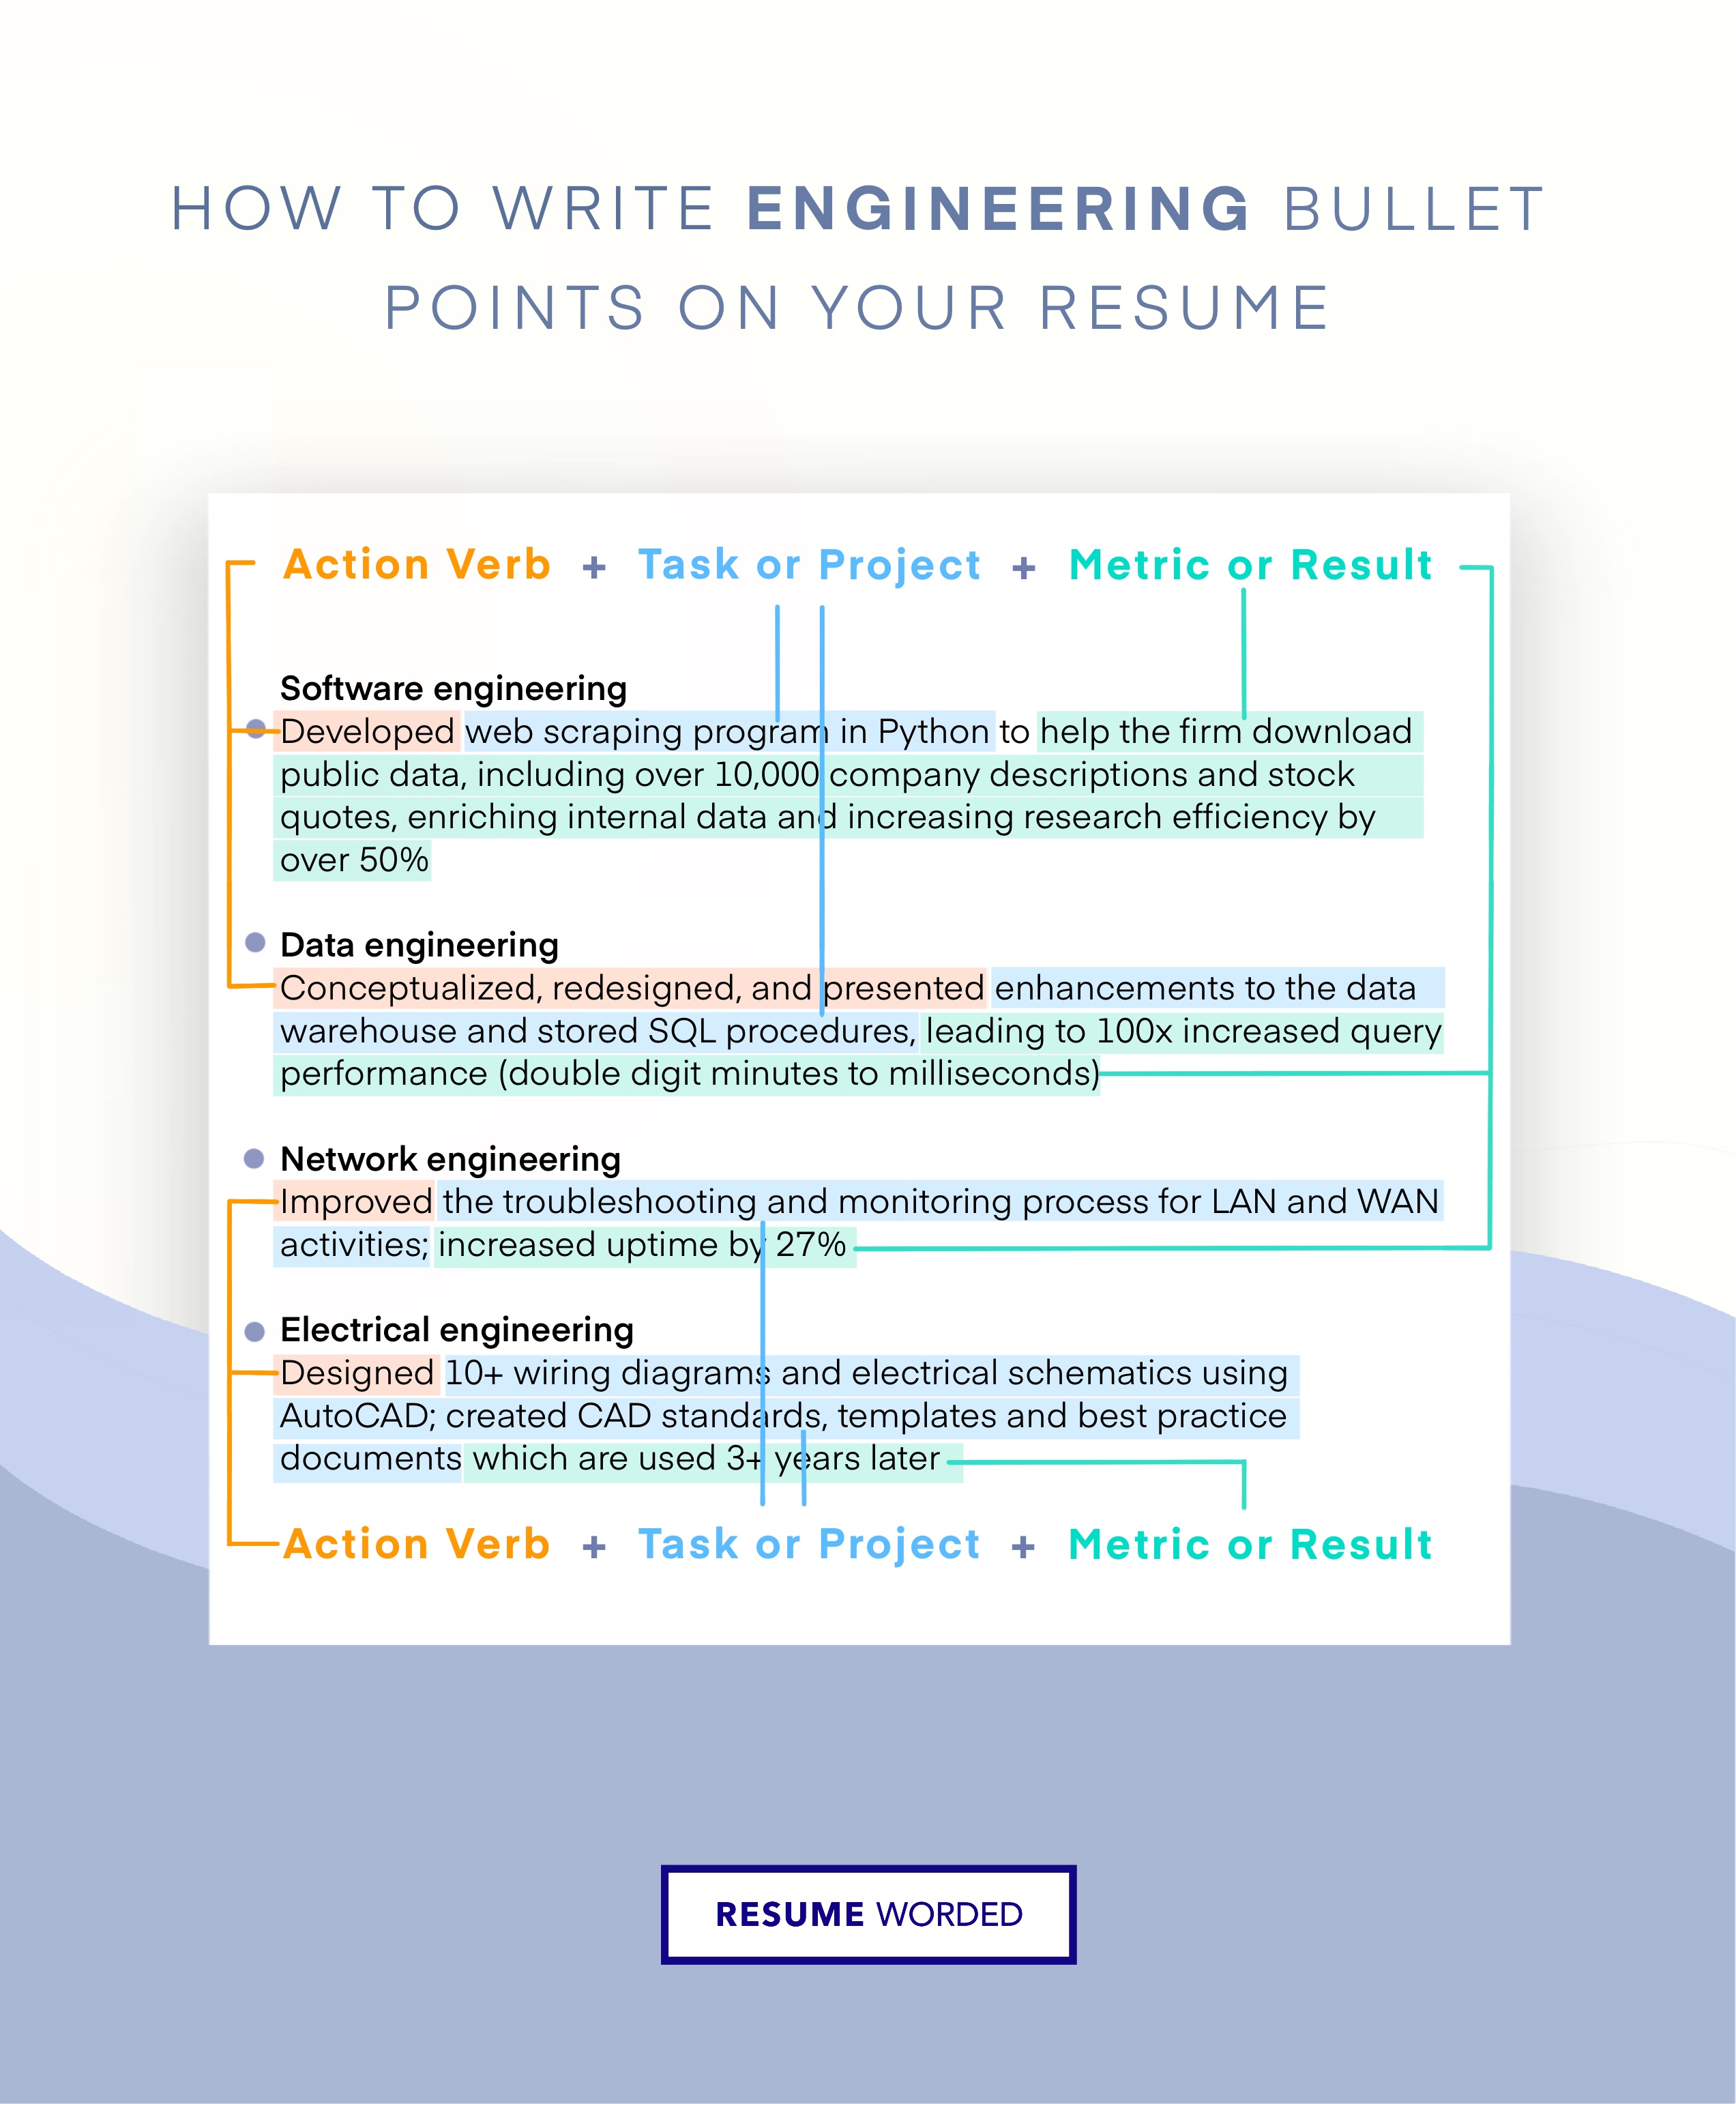 Structure your resume based on what sub-sector of civil engineering you want to work in - Civil Engineer Resume